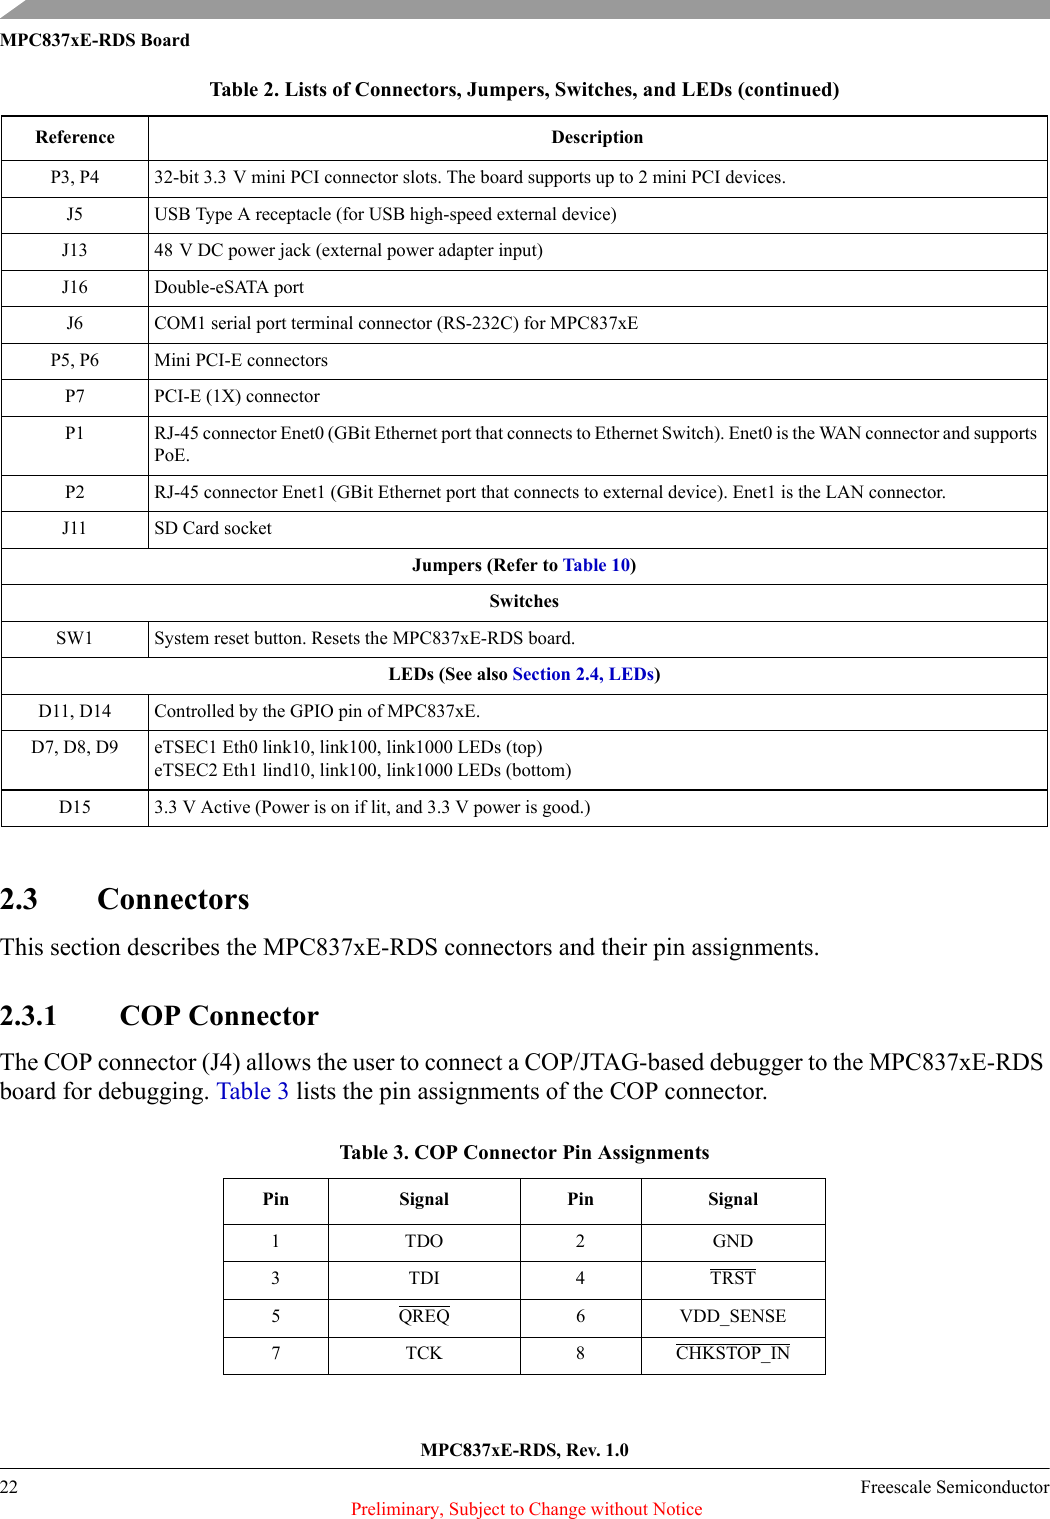 MPC837xE-RDS, Rev. 1.022 Freescale Semiconductor Preliminary, Subject to Change without NoticeMPC837xE-RDS Board2.3 ConnectorsThis section describes the MPC837xE-RDS connectors and their pin assignments.2.3.1 COP ConnectorThe COP connector (J4) allows the user to connect a COP/JTAG-based debugger to the MPC837xE-RDS board for debugging. Table 3 lists the pin assignments of the COP connector.P3, P4 32-bit 3.3 V mini PCI connector slots. The board supports up to 2 mini PCI devices.J5 USB Type A receptacle (for USB high-speed external device)J13 48 V DC power jack (external power adapter input)J16 Double-eSATA portJ6 COM1 serial port terminal connector (RS-232C) for MPC837xEP5, P6 Mini PCI-E connectorsP7 PCI-E (1X) connectorP1 RJ-45 connector Enet0 (GBit Ethernet port that connects to Ethernet Switch). Enet0 is the WAN connector and supports PoE.P2 RJ-45 connector Enet1 (GBit Ethernet port that connects to external device). Enet1 is the LAN connector. J11 SD Card socketJumpers (Refer to Table 10 )SwitchesSW1 System reset button. Resets the MPC837xE-RDS board.LEDs (See also Section 2.4, LEDs)D11, D14 Controlled by the GPIO pin of MPC837xE.D7, D8, D9 eTSEC1 Eth0 link10, link100, link1000 LEDs (top)eTSEC2 Eth1 lind10, link100, link1000 LEDs (bottom)D15 3.3 V Active (Power is on if lit, and 3.3 V power is good.)Table 3. COP Connector Pin AssignmentsPin Signal Pin Signal1 TDO 2 GND3TDI 4TRST5QREQ 6 VDD_SENSE7 TCK 8 CHKSTOP_INTable 2. Lists of Connectors, Jumpers, Switches, and LEDs (continued)Reference Description 